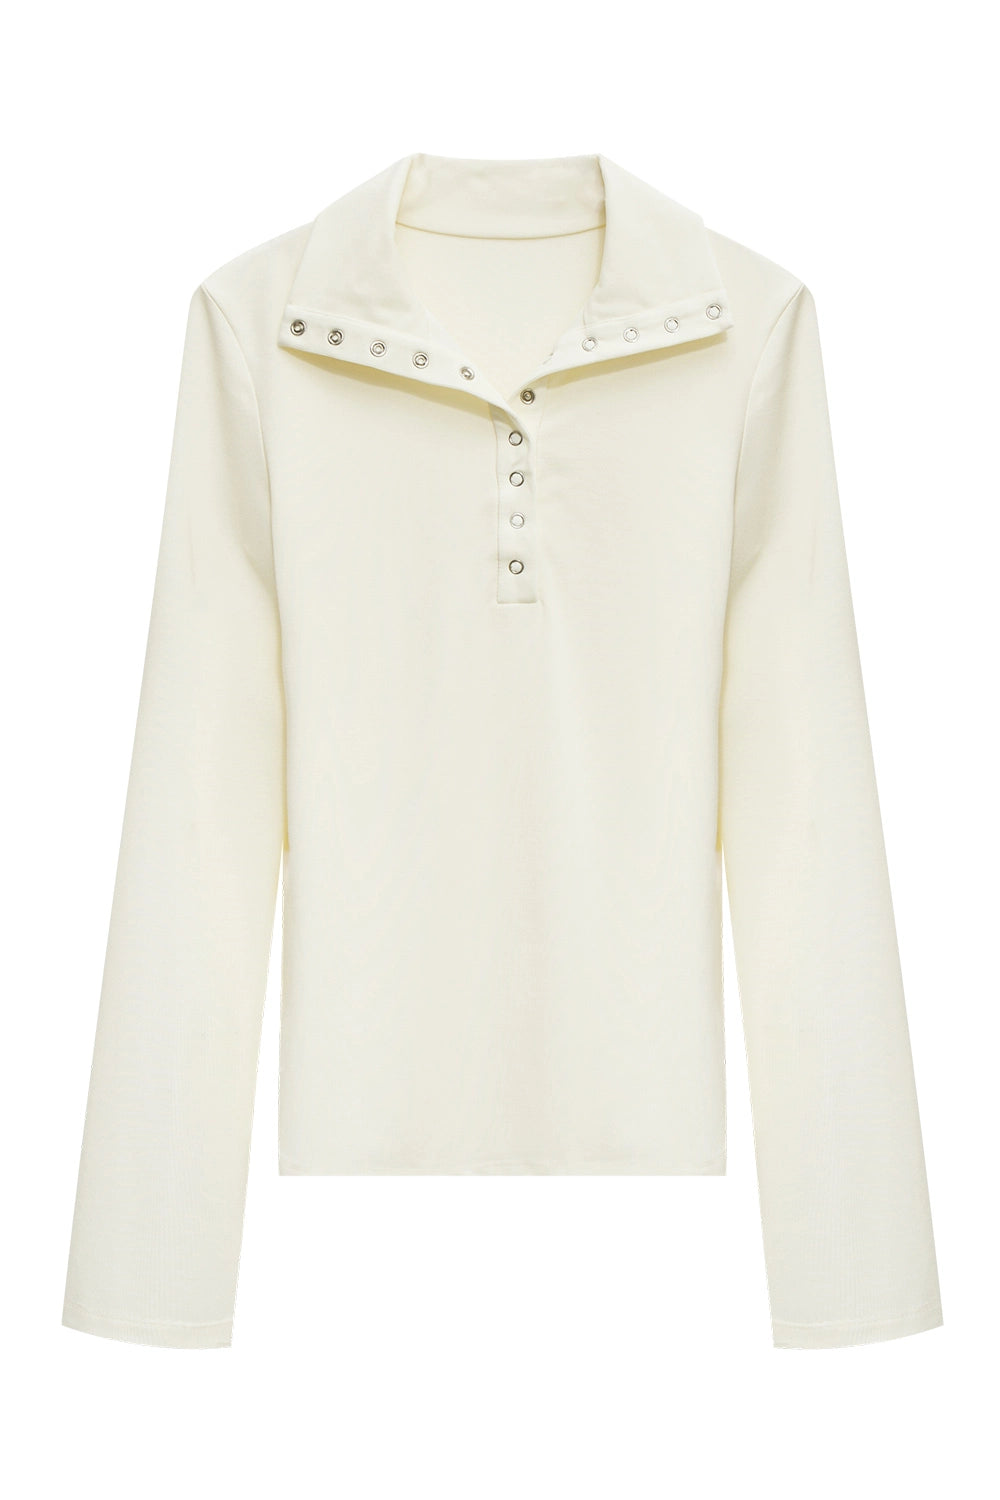 Woman's Long Sleeve Henley Top with Embellished Collar Detail